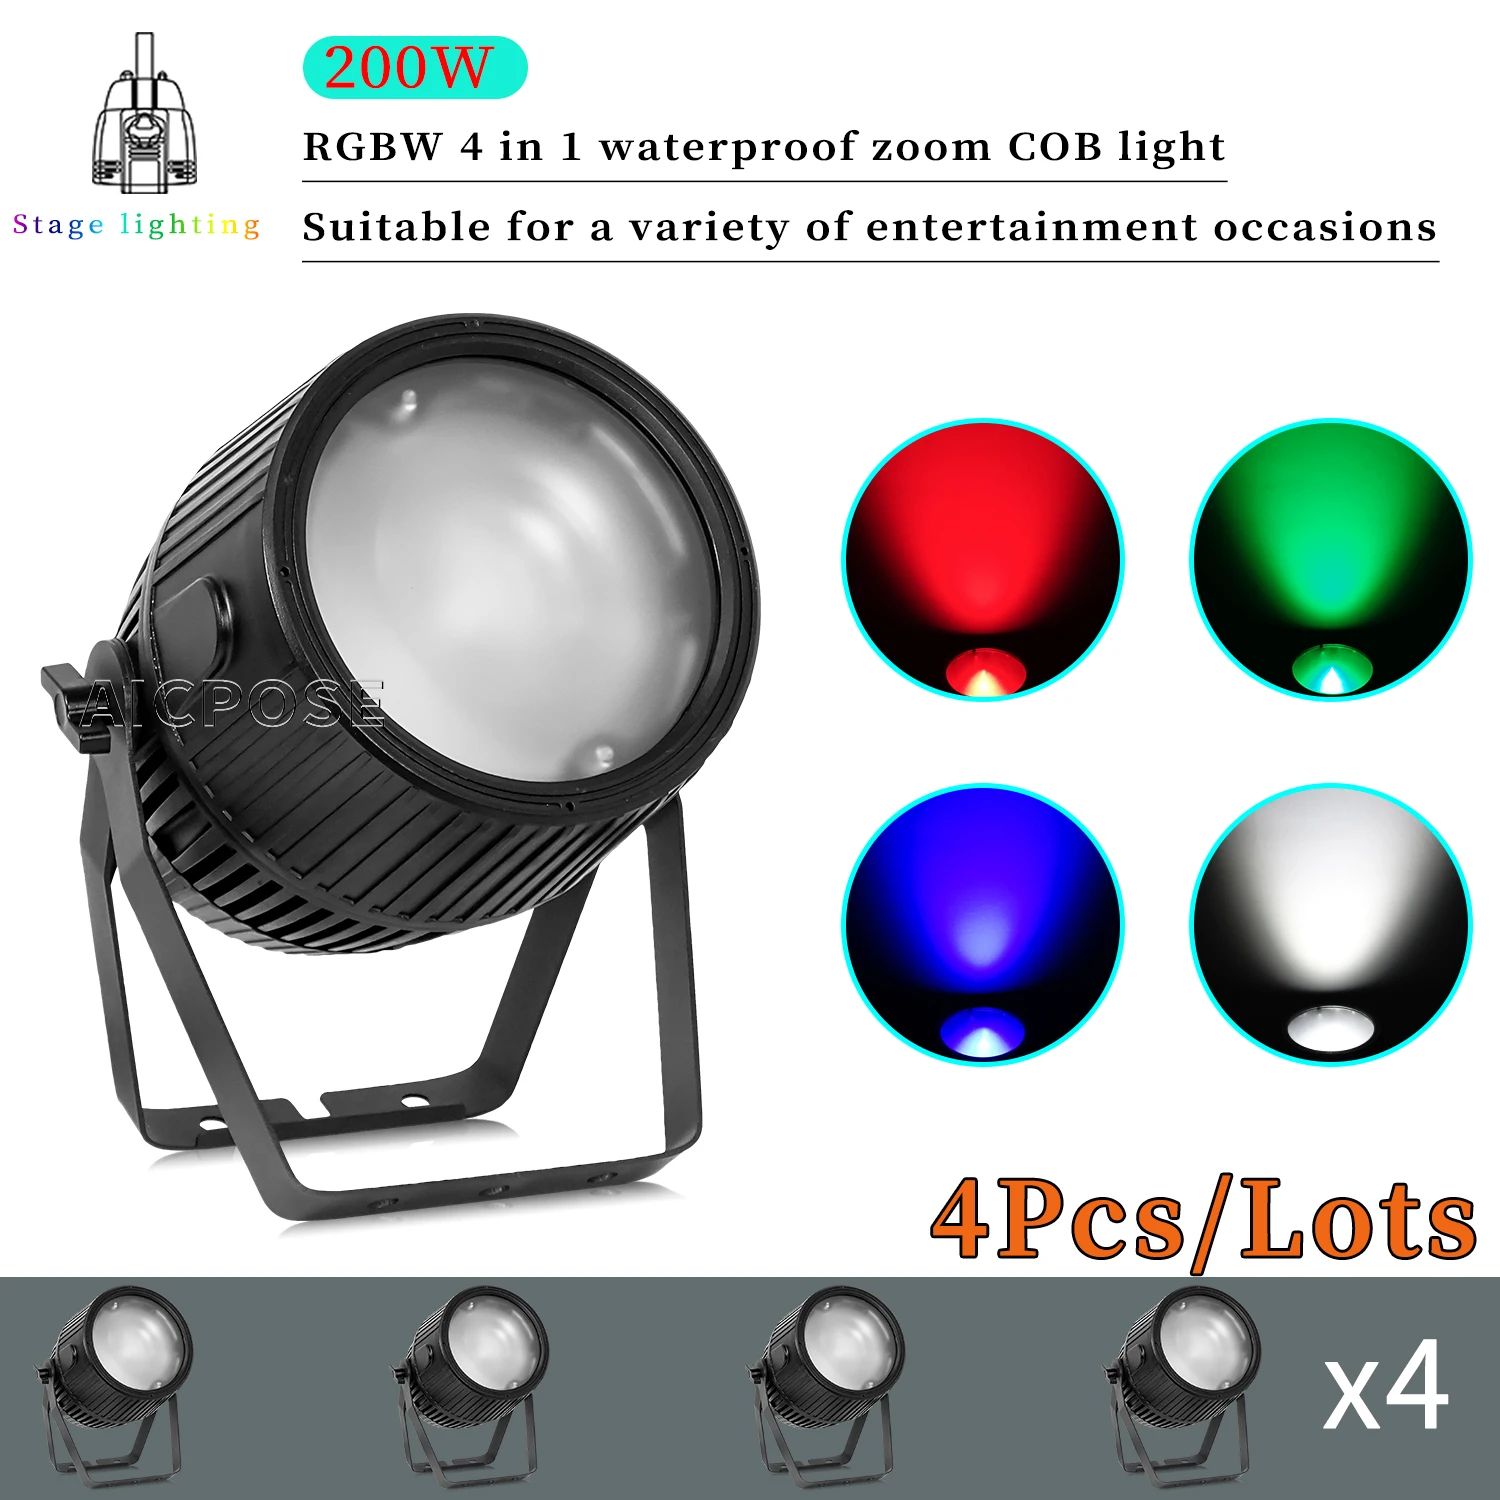 

4Pcs/Lots 200W RGBW 4in1 COB Audience Light Cool White/Warm White LED Waterproof Zoom Stage Spotlight DJ Disco Equipment